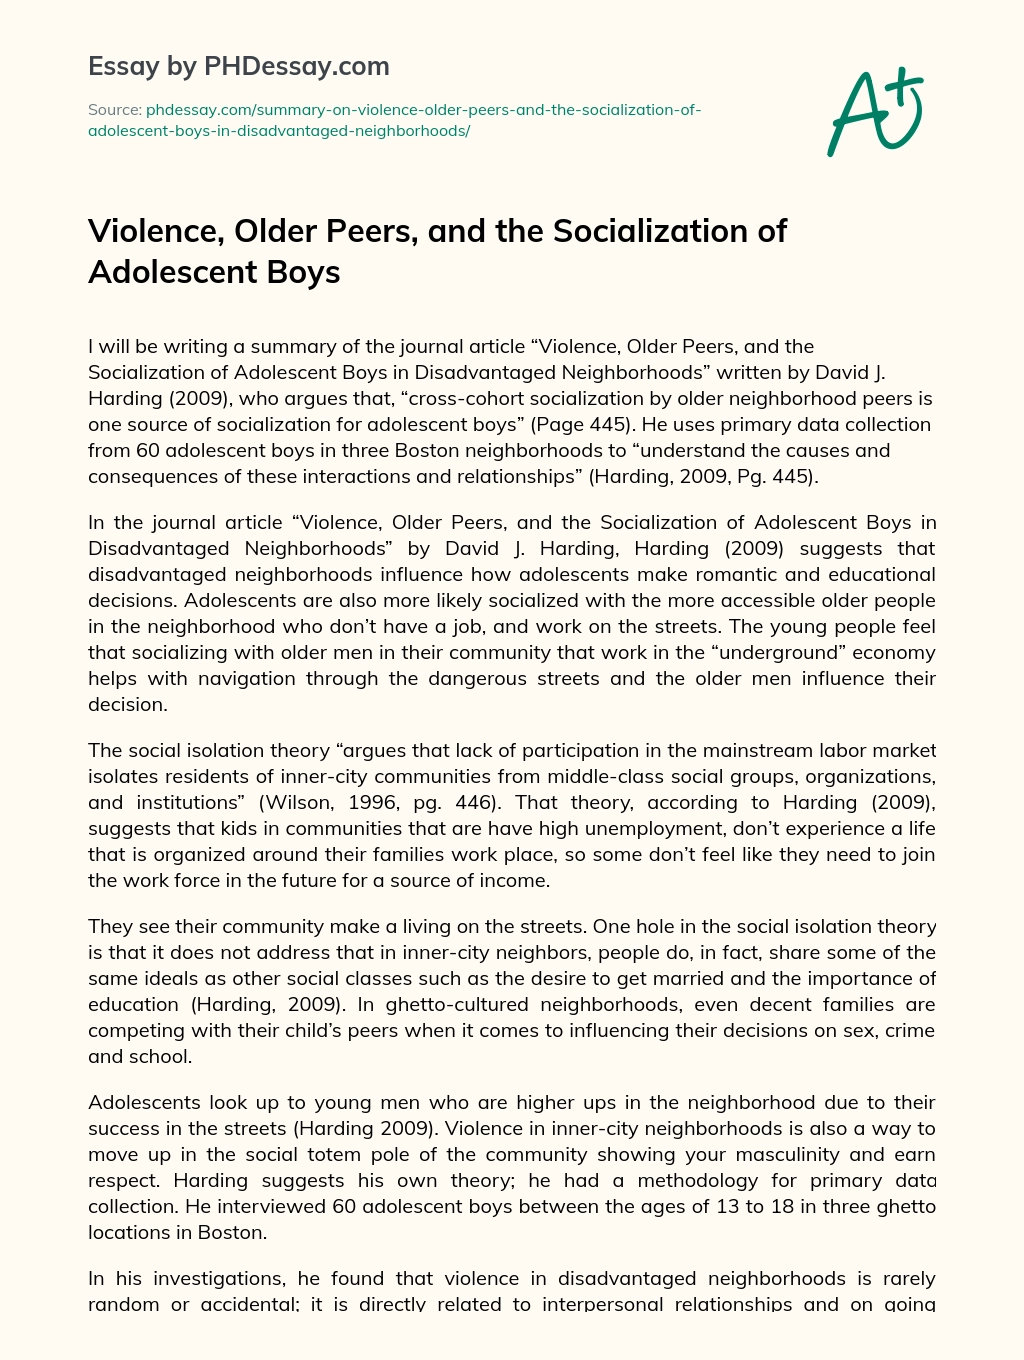 Violence, Older Peers, and the Socialization of Adolescent Boys essay